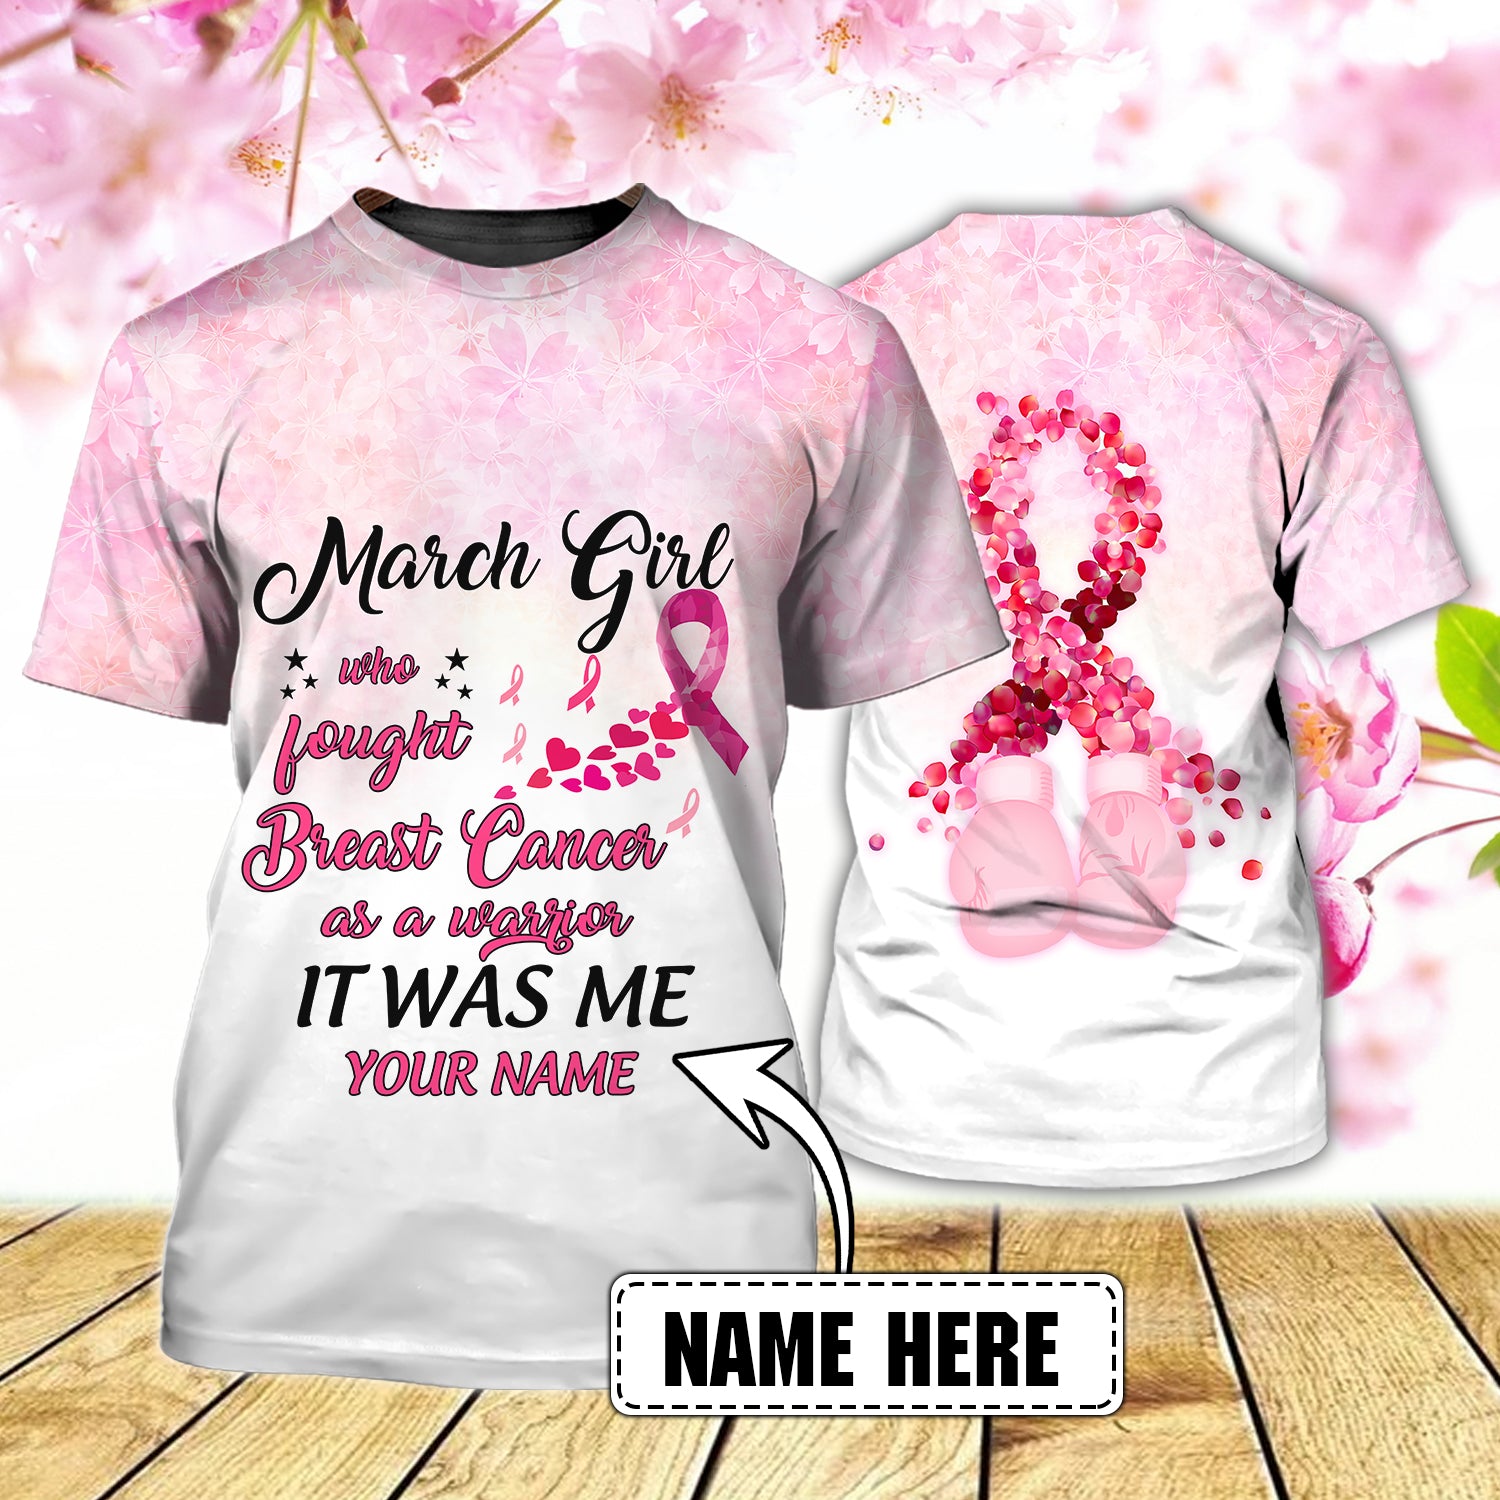 March Girl fought Breast Cancer as a Warrior - Personalized Name 3D Tshirt - Nmd 26